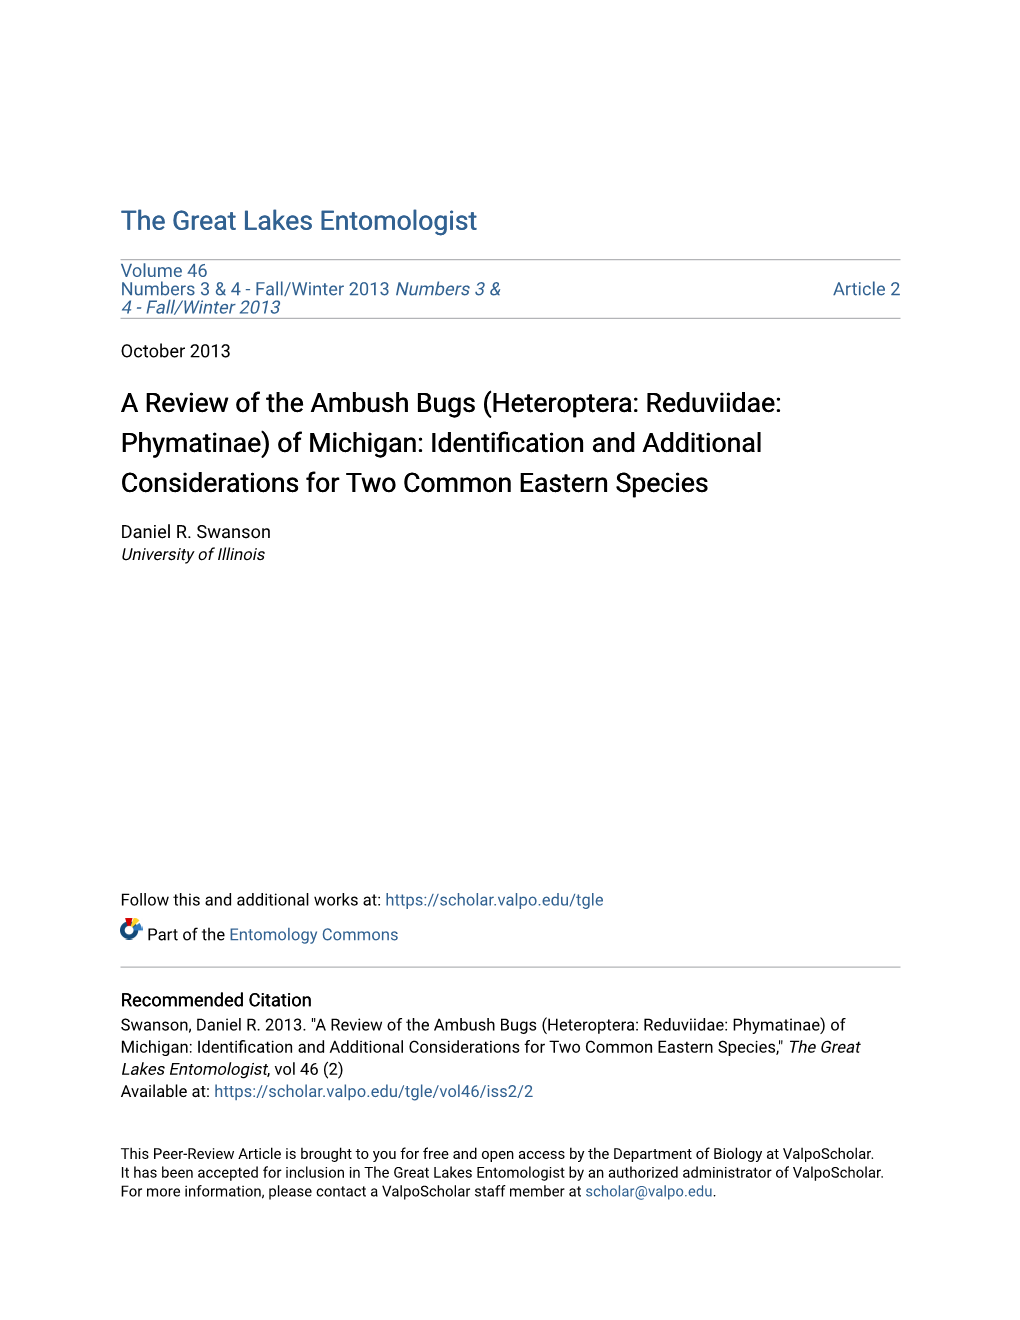 (Heteroptera: Reduviidae: Phymatinae) of Michigan: Identification and Additional Considerations for Two Common Eastern Species